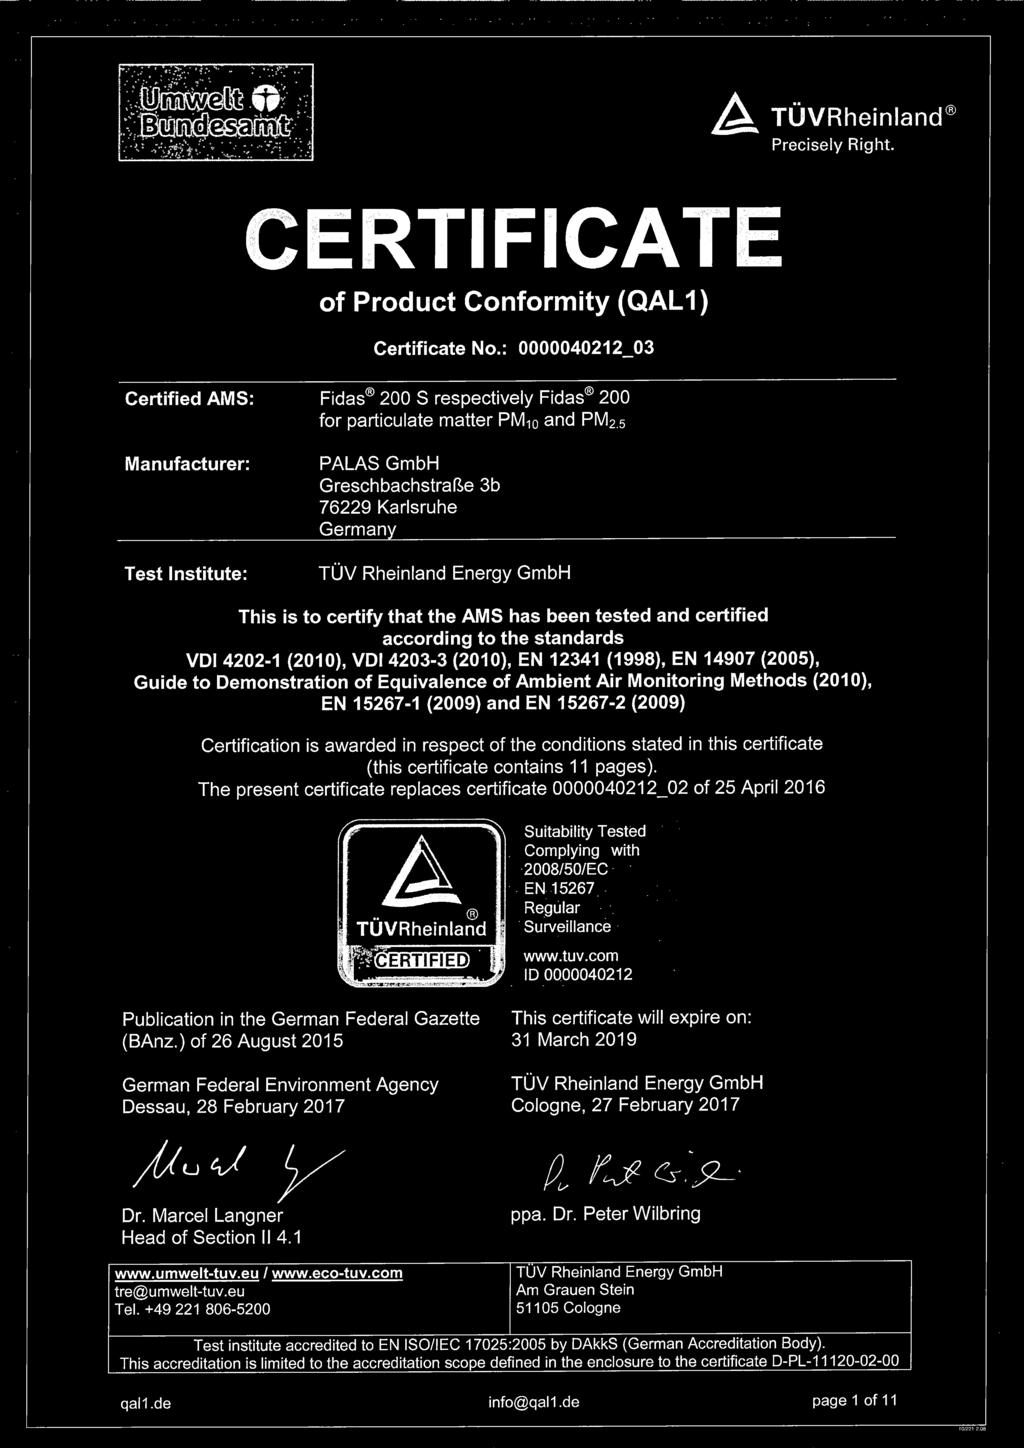 respect of the conditions stated in this ceriificate (this certificate contains 11 pages).